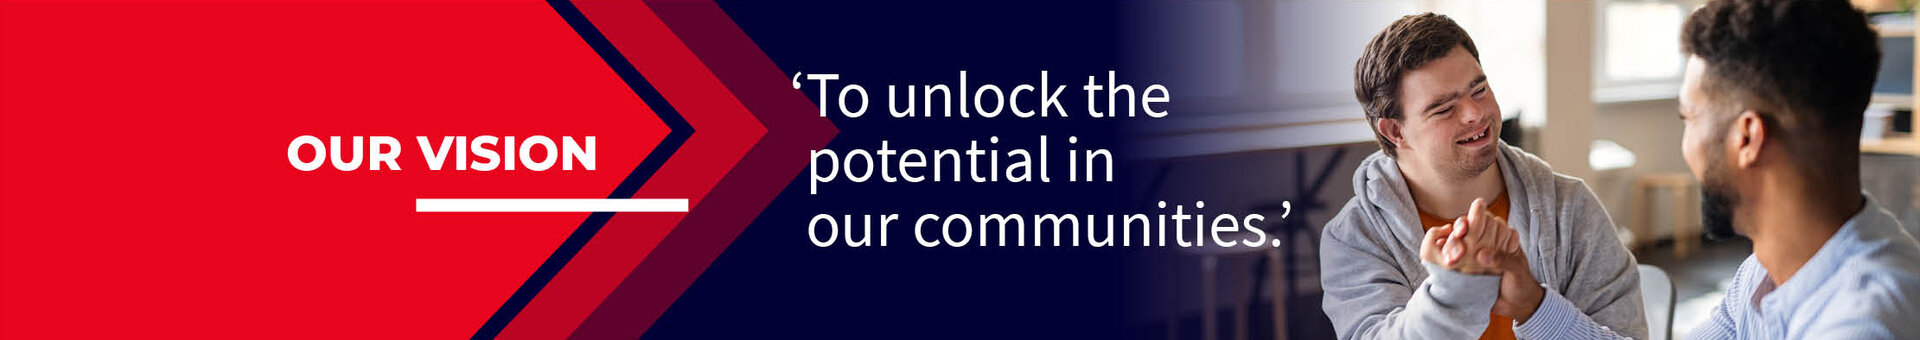 Our Vision: To Unlock the potential in our communities